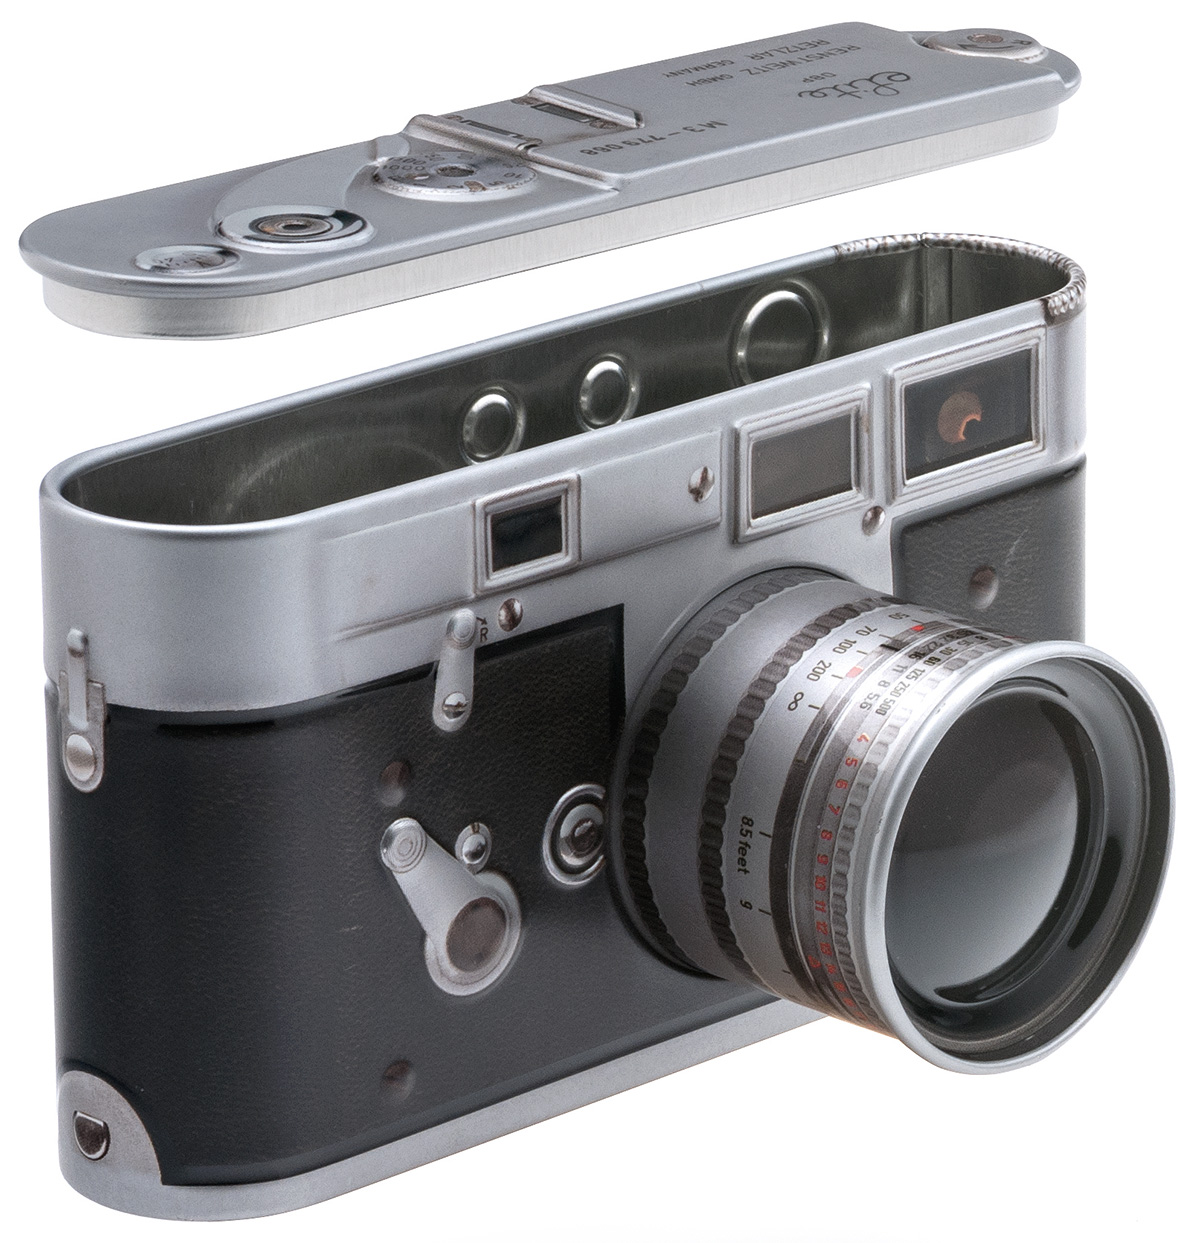 Caius ik wil Glimmend Leica M3 vintage replica camera tins for sale - Leica Rumors